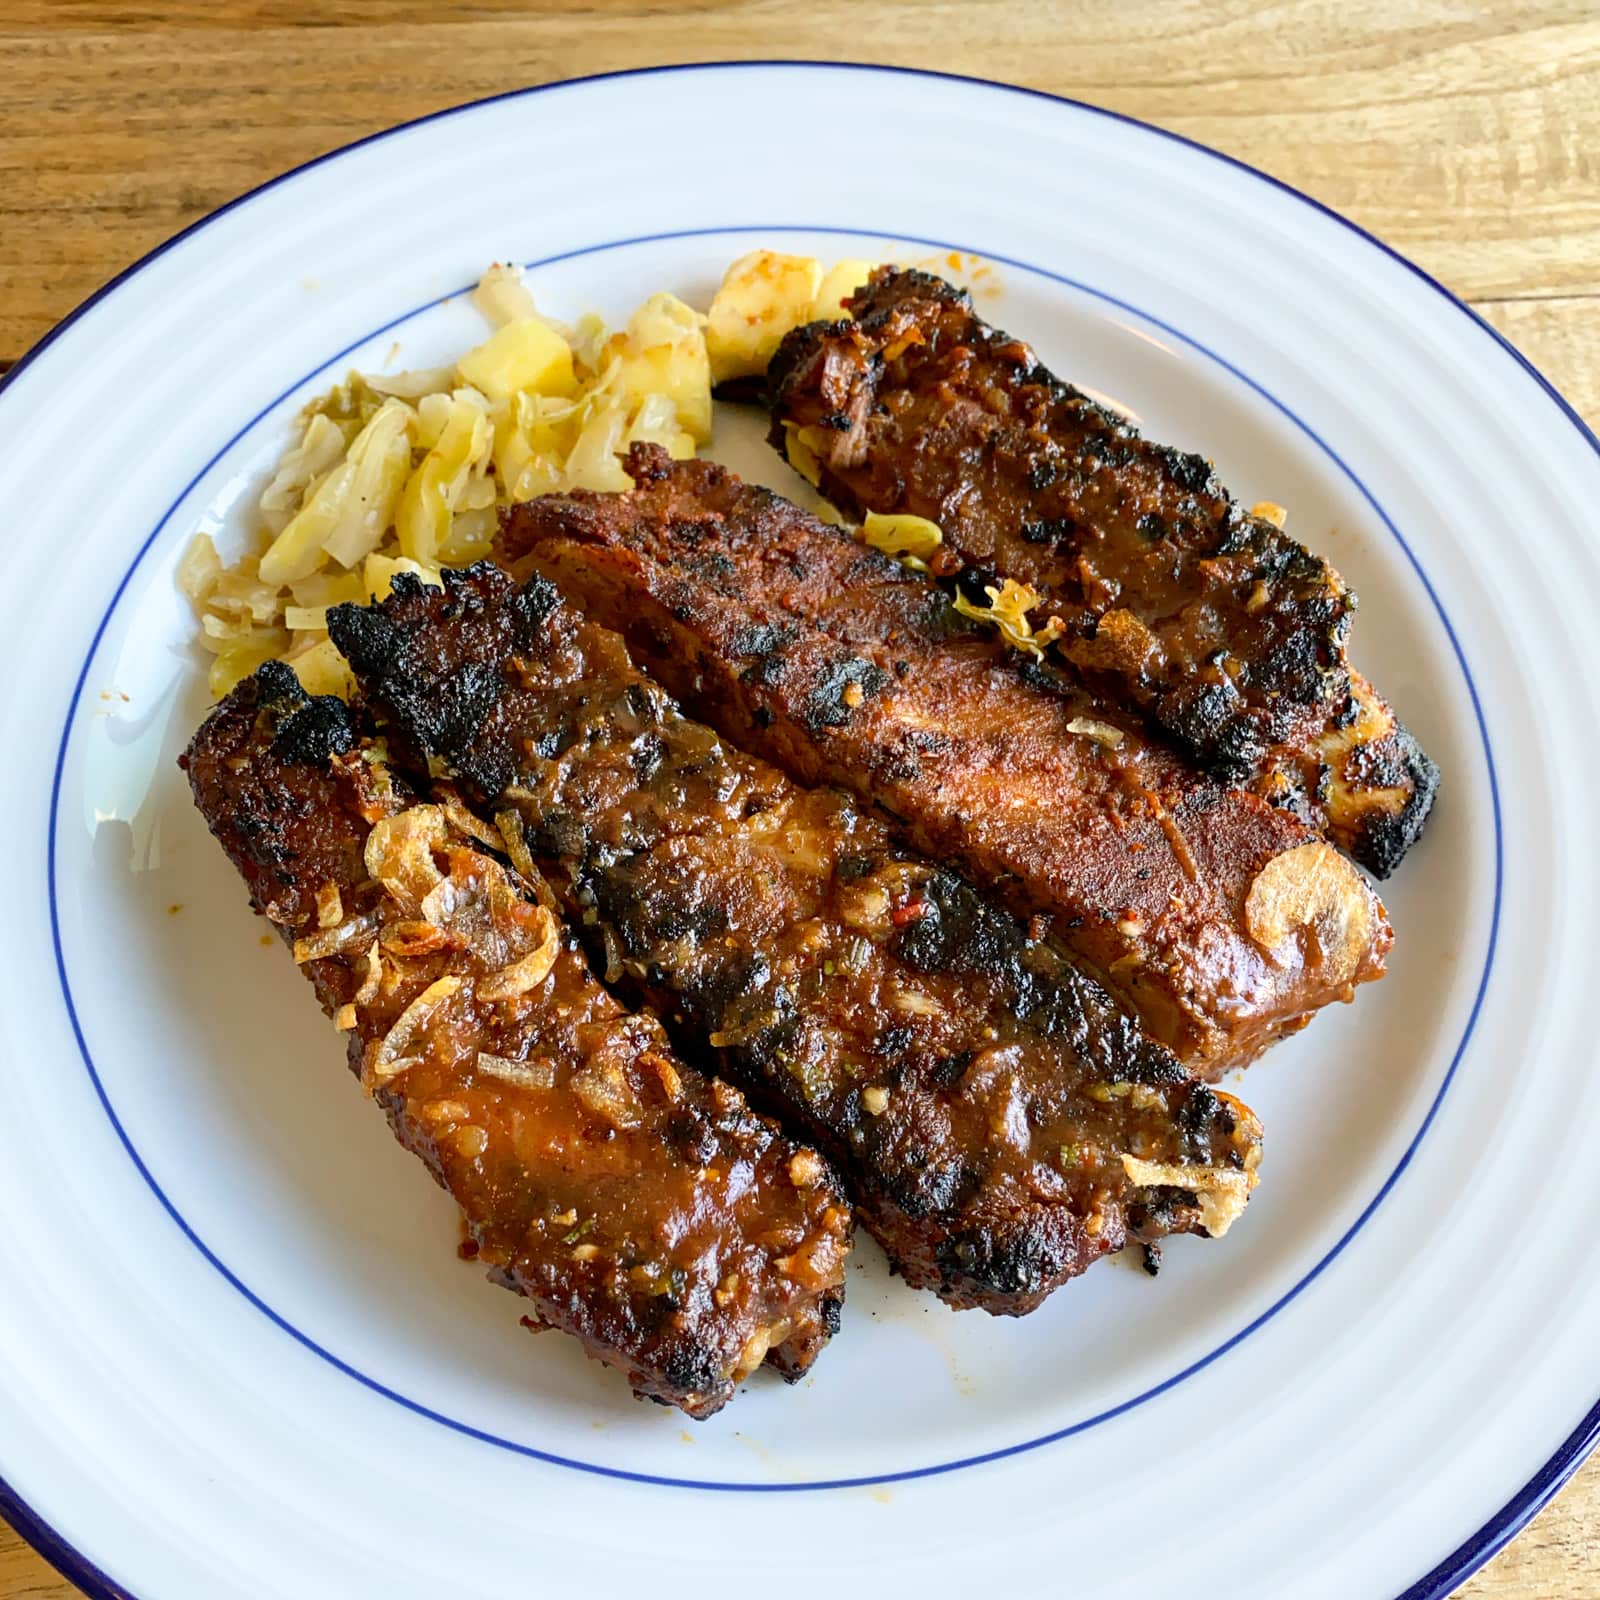 Pork ribs with guava BBQ sauce from Launderette